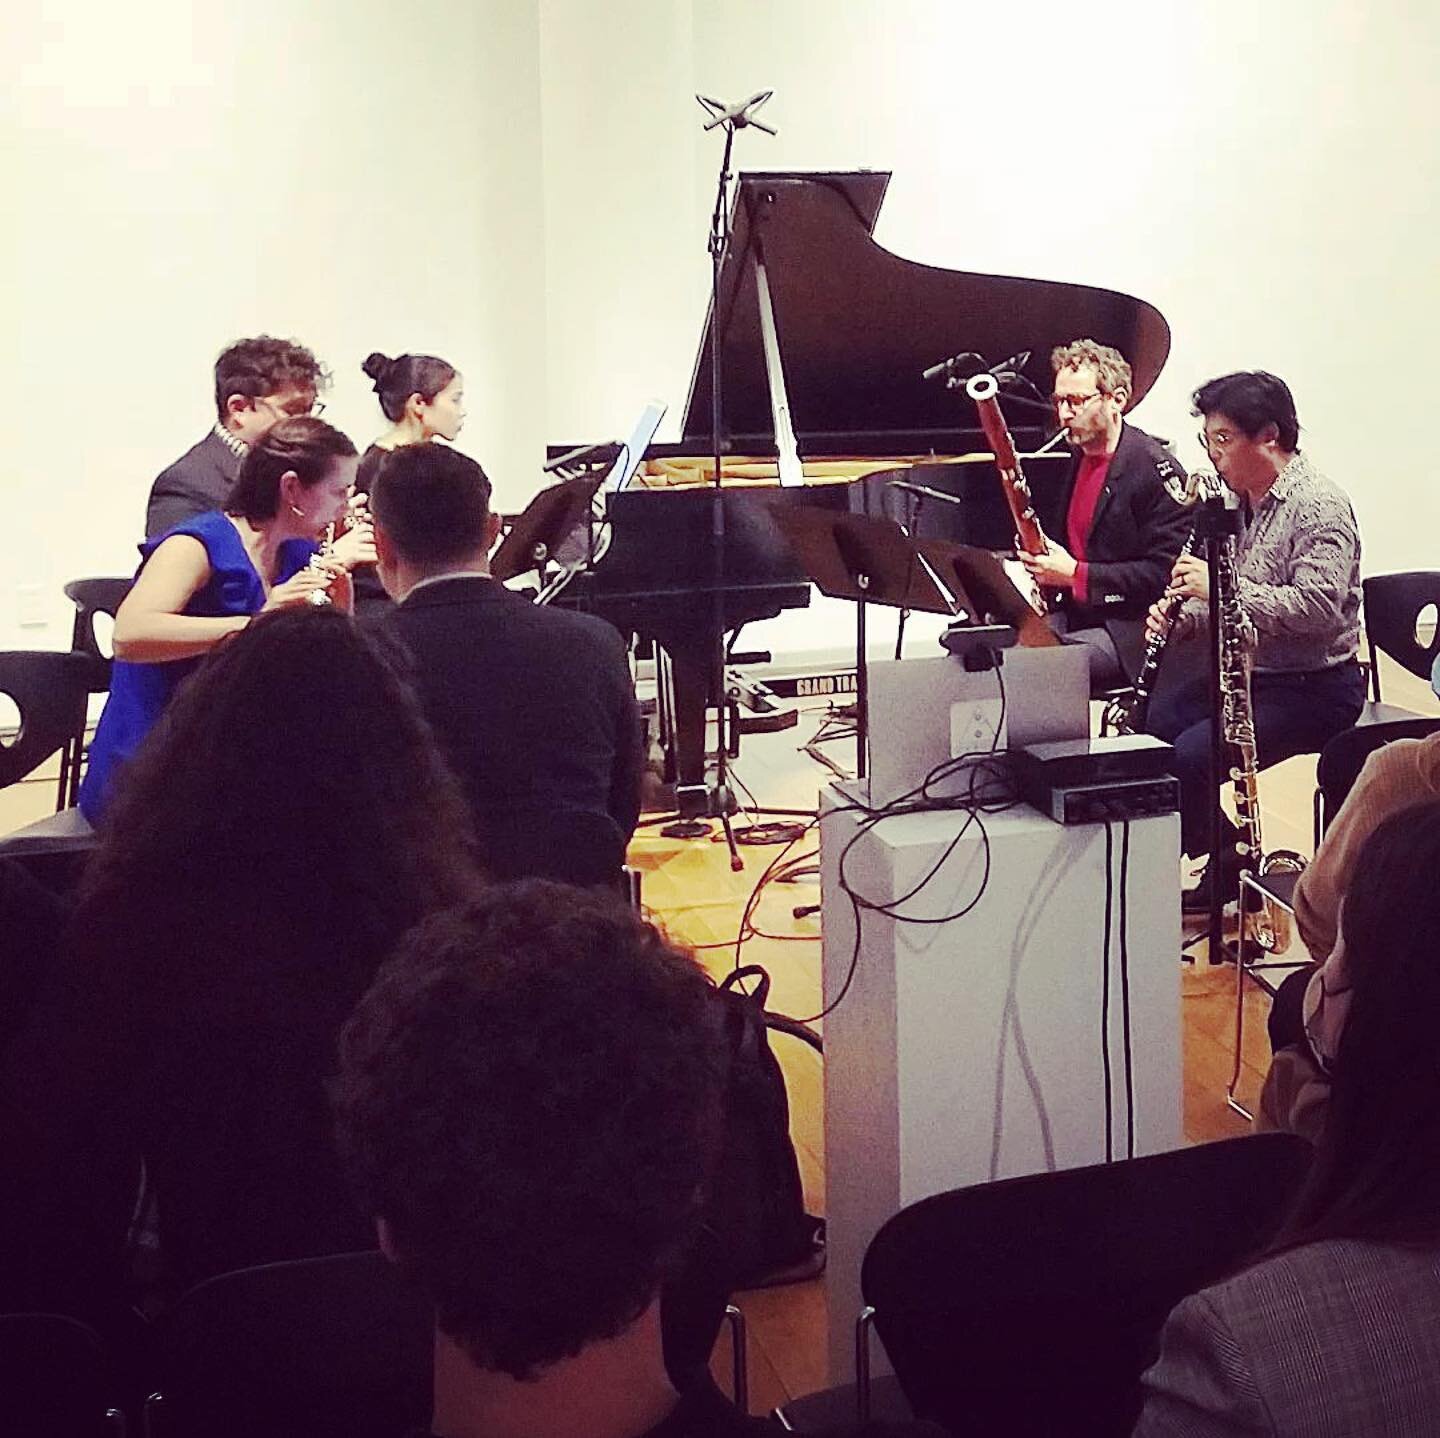 #Repost @icebergnewmusic
・・・
Thank you to everyone who packed the house for yesterday's sold-out concert with @decodamusic and @ysealeyruiz ! It was an amazing evening, and we're glad we were able to share it with you.
.
.
.
.
.
.
.
.
.
#thepeacechro